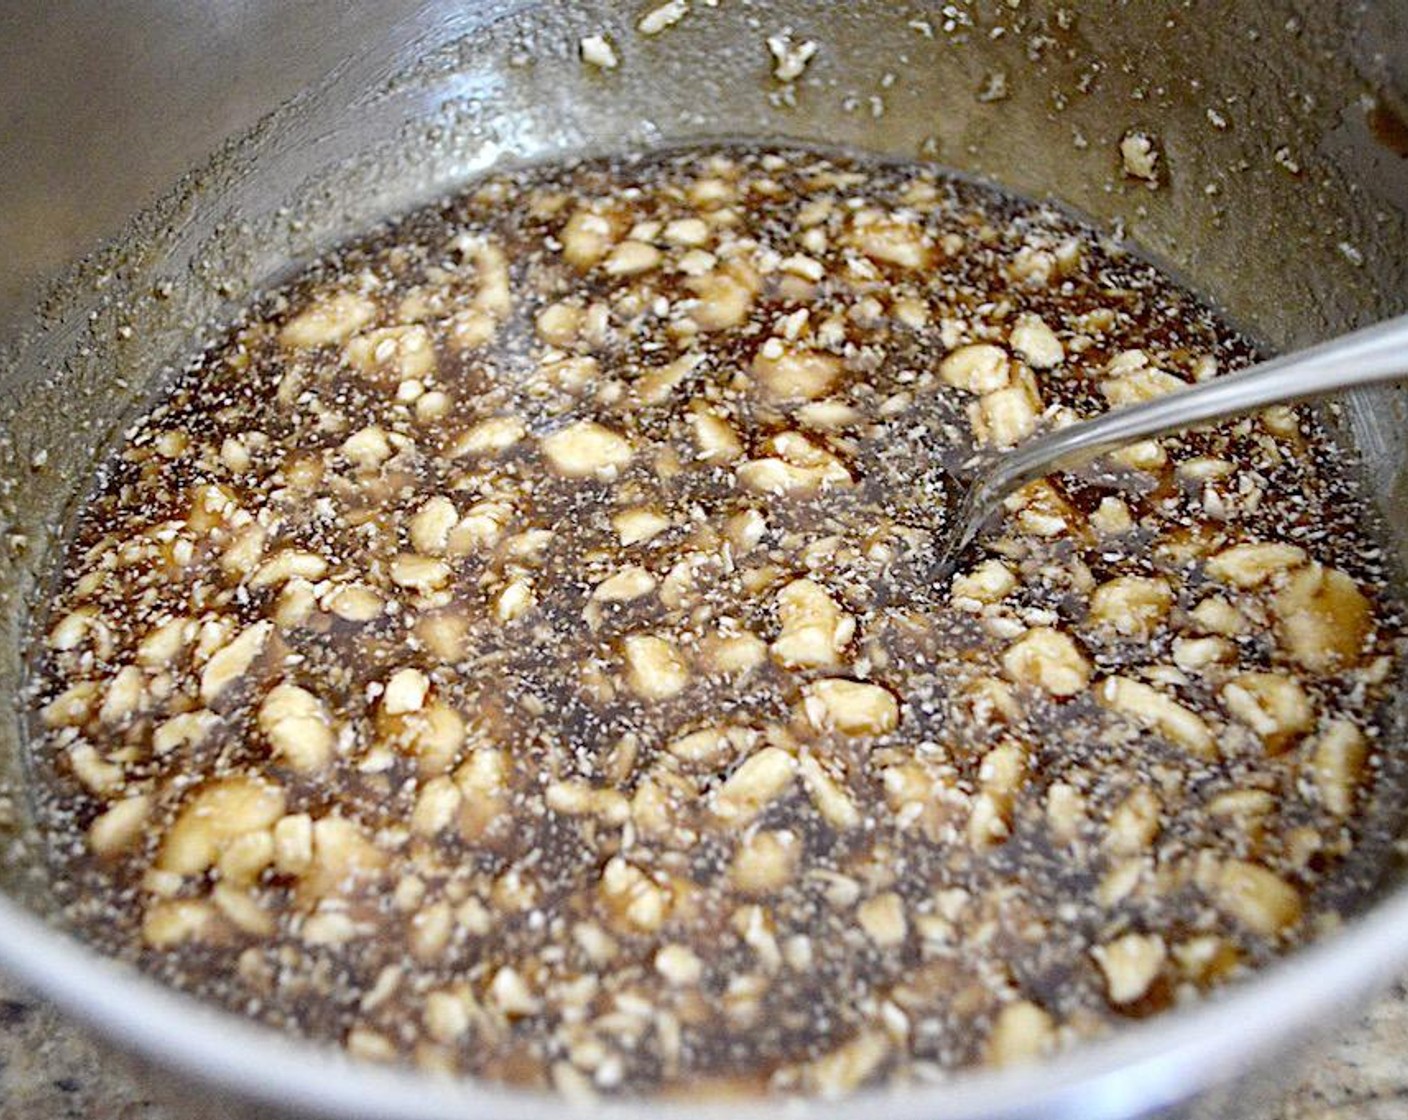 step 5 For the glaze, stir the Butter (1/2 cup), Dark Brown Sugar (1 cup), Maple Syrup (3/4 cup), and Water (1/4 cup) together thoroughly. The butter should be broken up but not melted in.